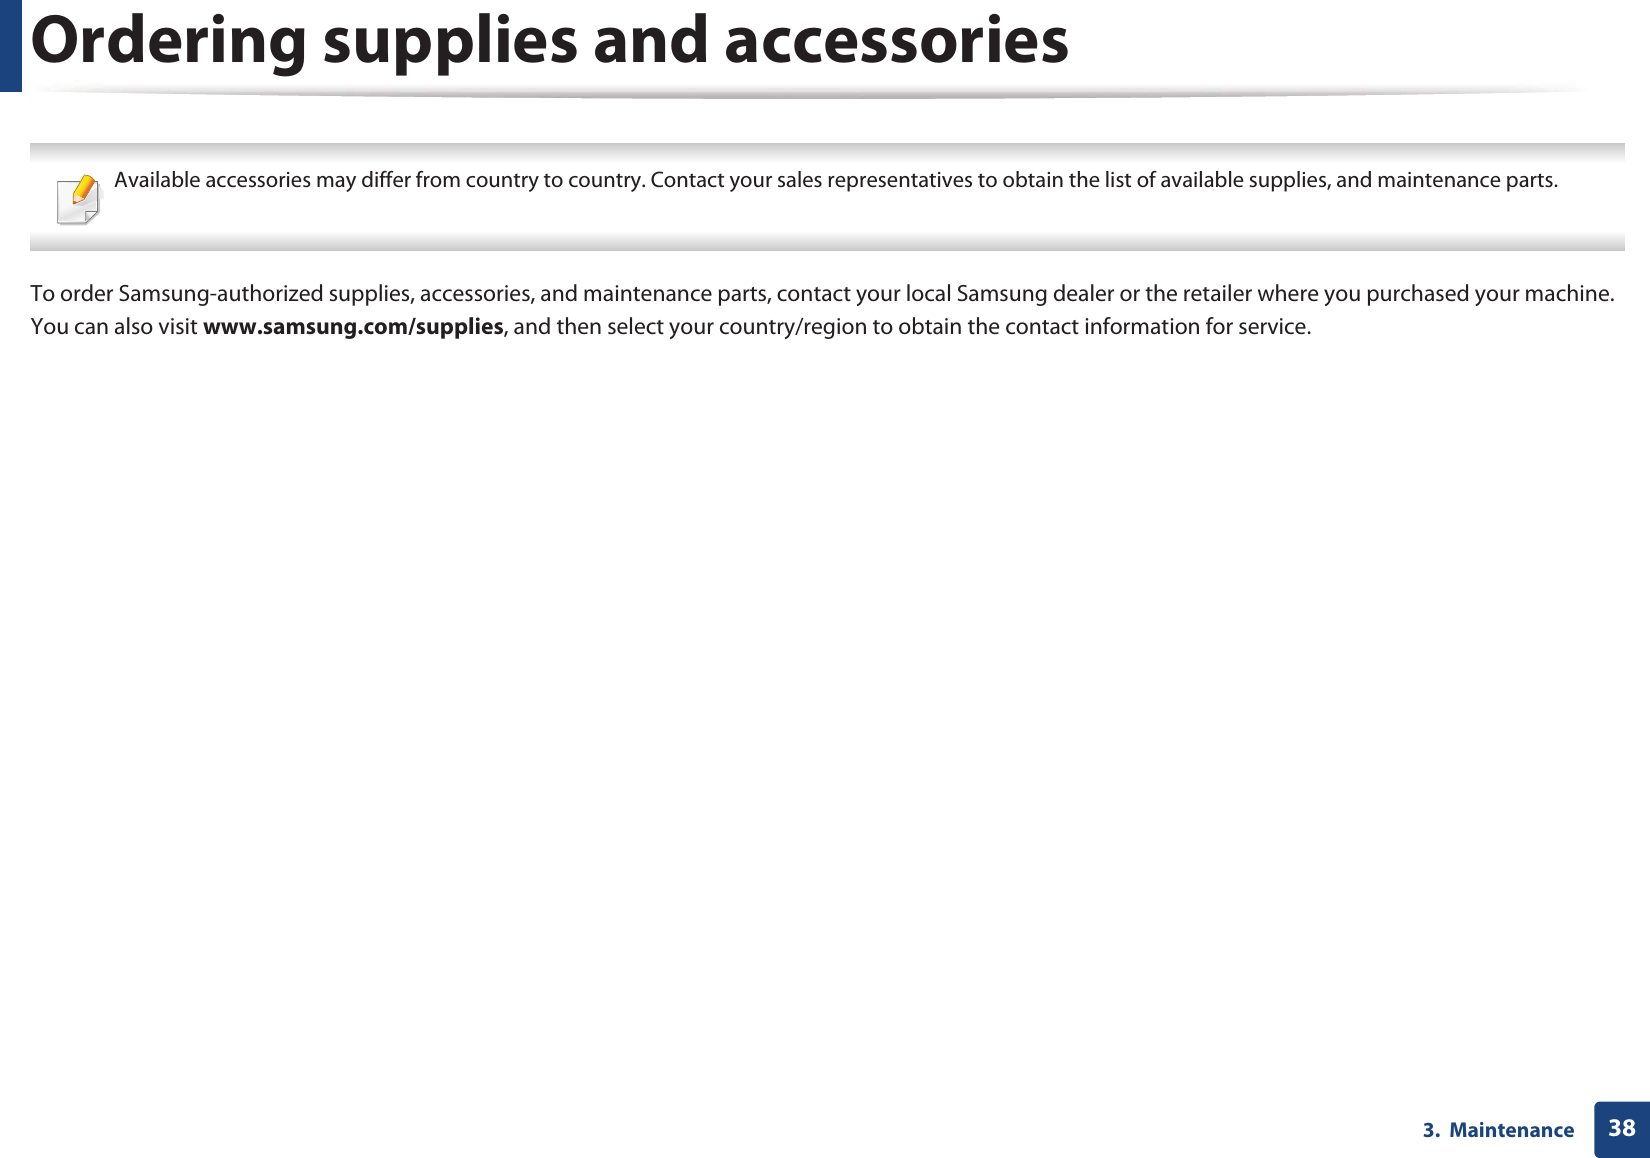 383.  MaintenanceOrdering supplies and accessories Available accessories may differ from country to country. Contact your sales representatives to obtain the list of available supplies, and maintenance parts. To order Samsung-authorized supplies, accessories, and maintenance parts, contact your local Samsung dealer or the retailer where you purchased your machine. You can also visit www.samsung.com/supplies, and then select your country/region to obtain the contact information for service.